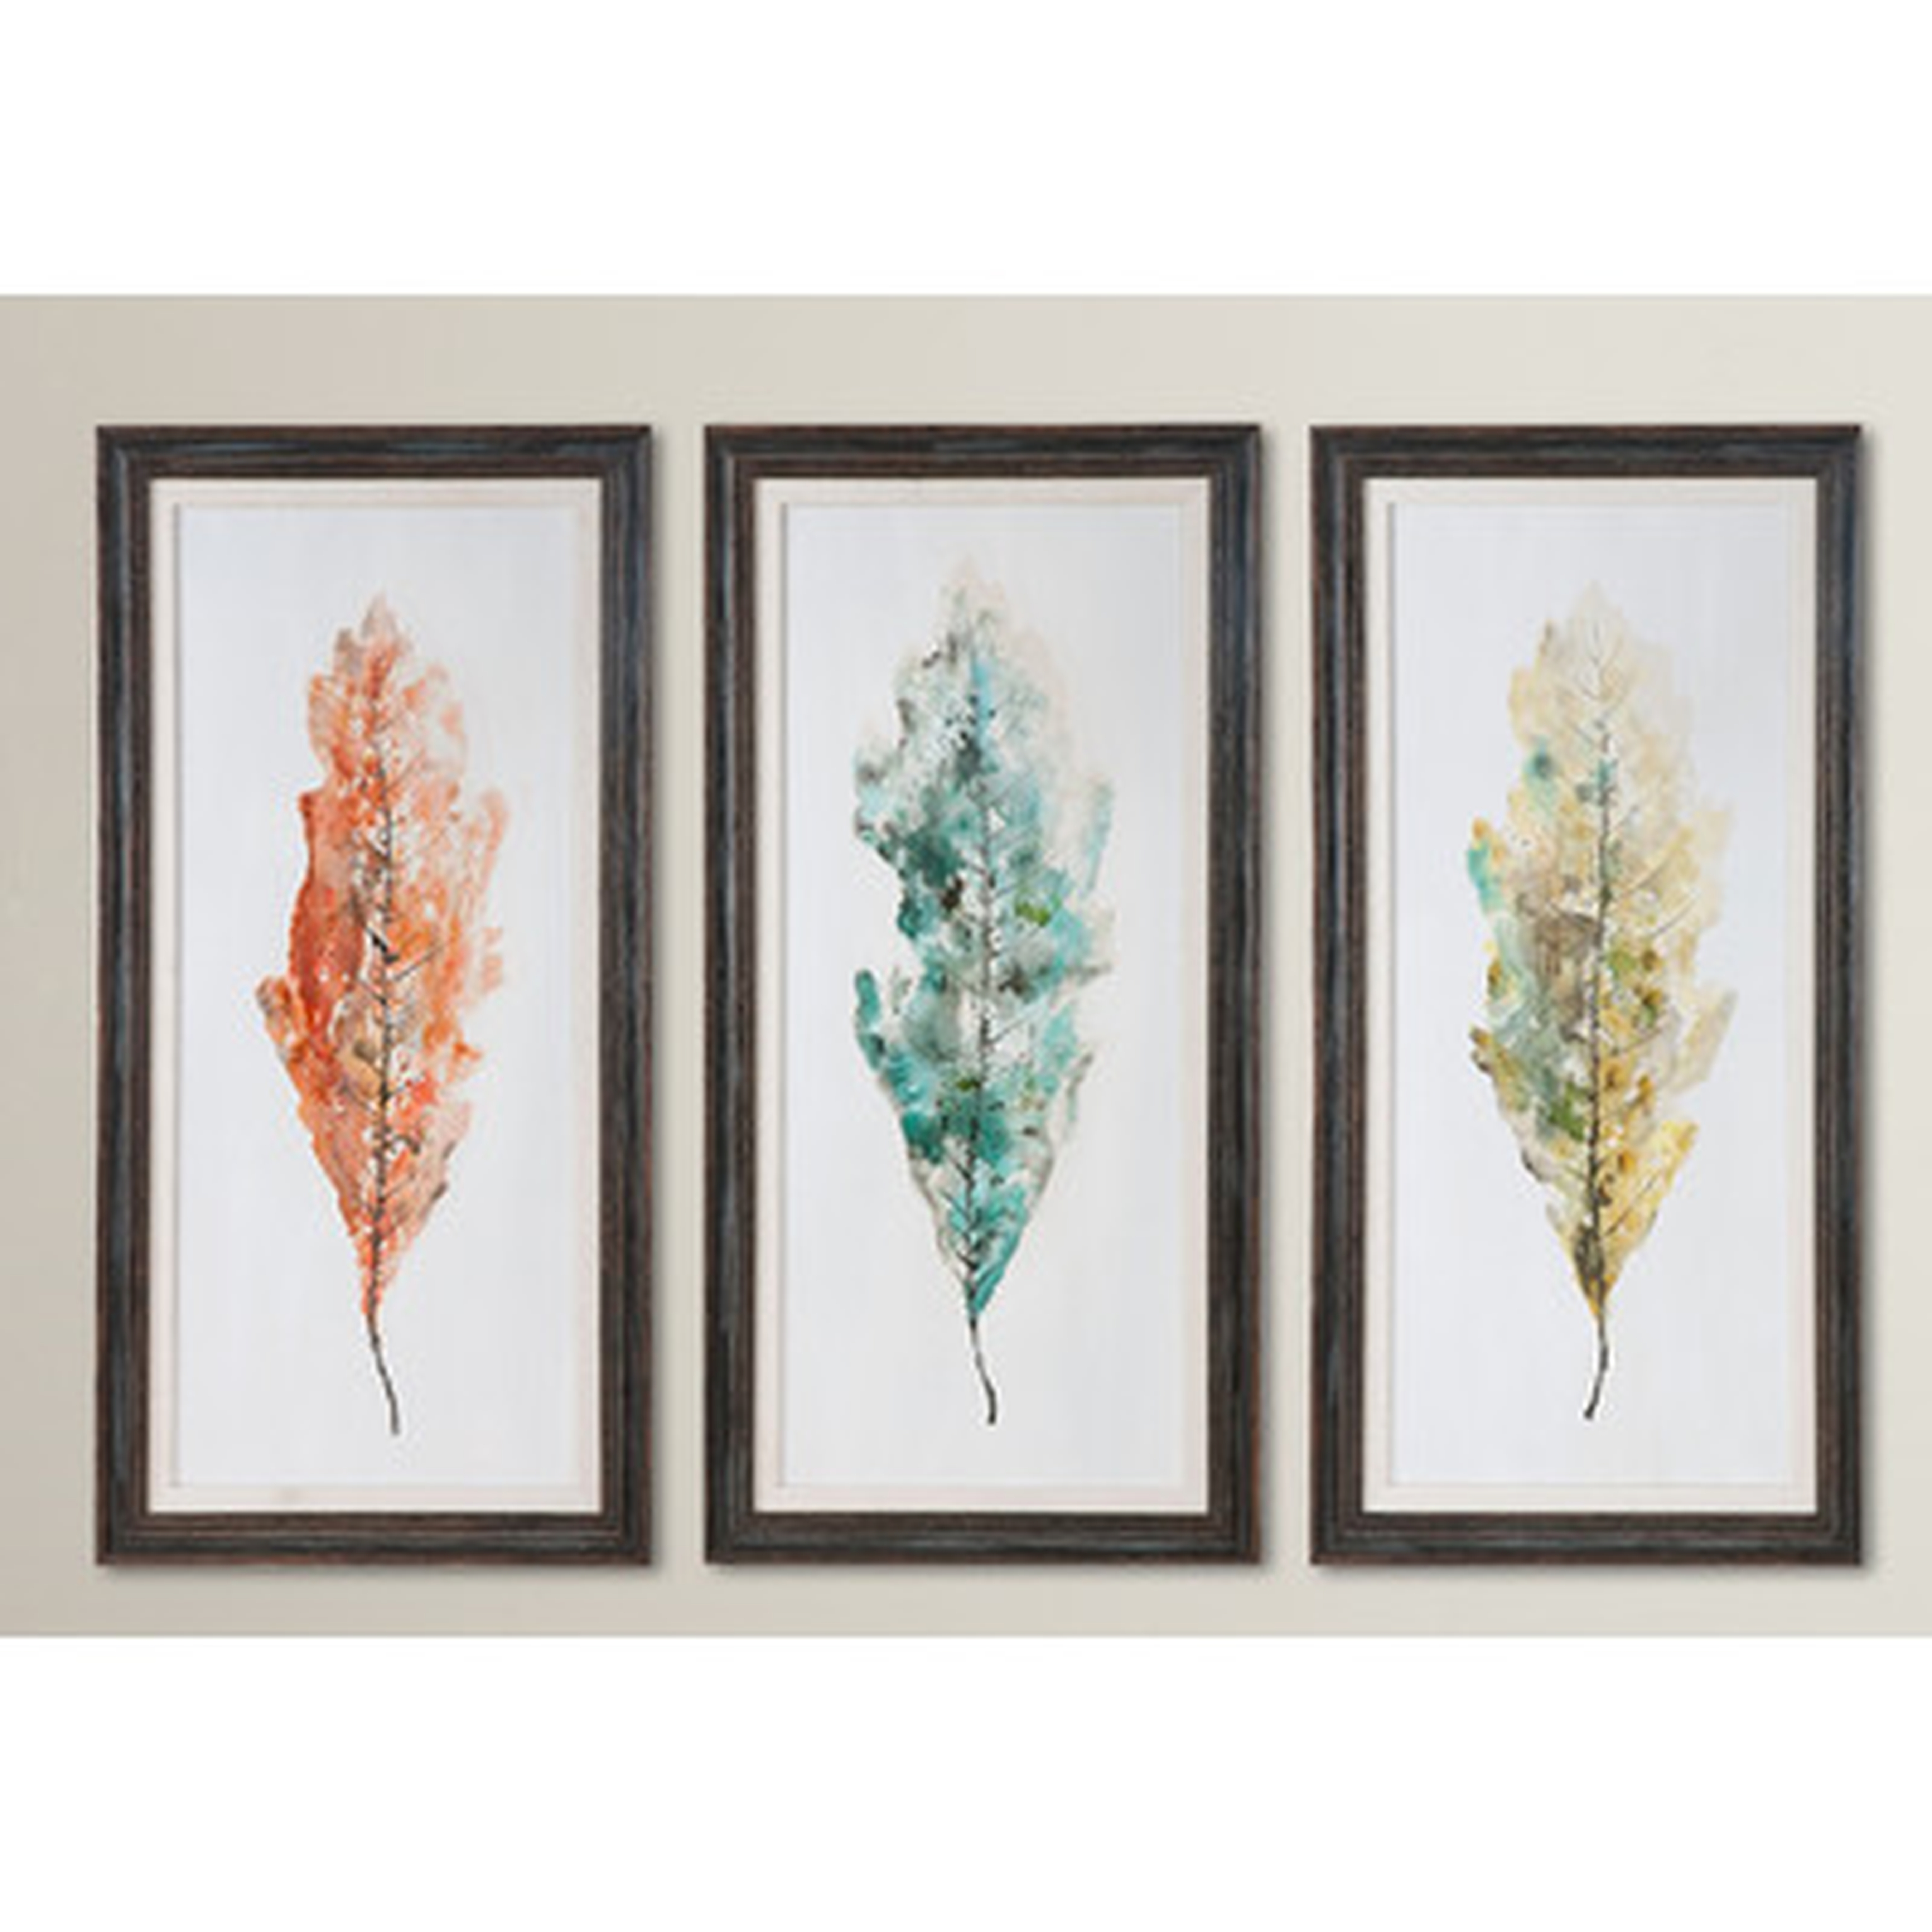 Tricolor Leaves Abstract Art 3 Piece Framed Painting Set - Wayfair